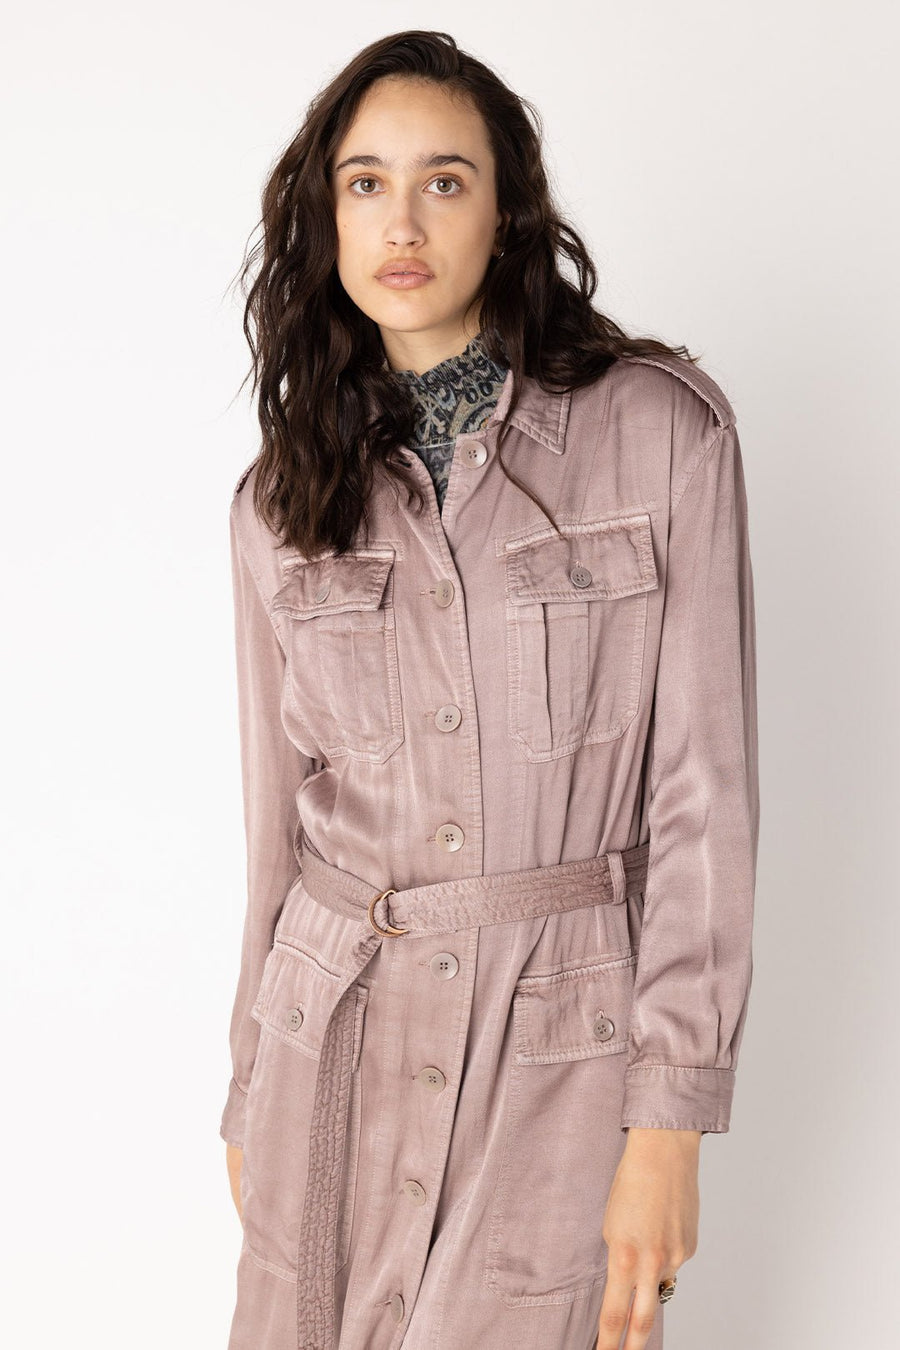 HANOVER TRENCH COAT, ORCHID - Burning Torch Online Boutique